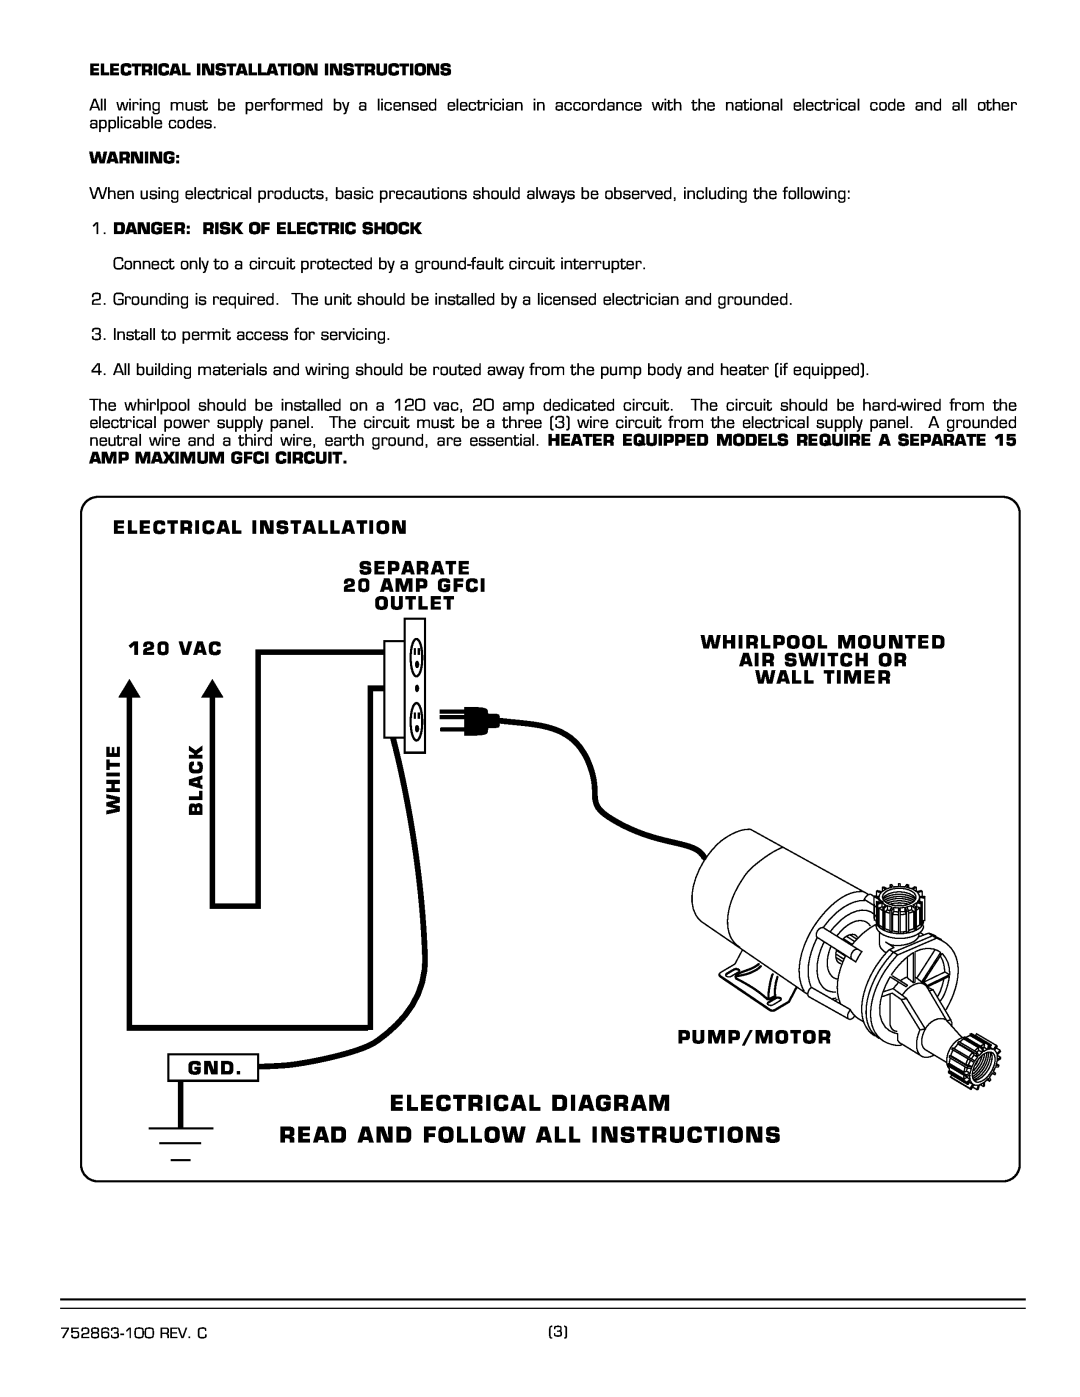 American Standard 2774E SERIES installation instructions Electrical Diagram, Read And Follow All Instructions 